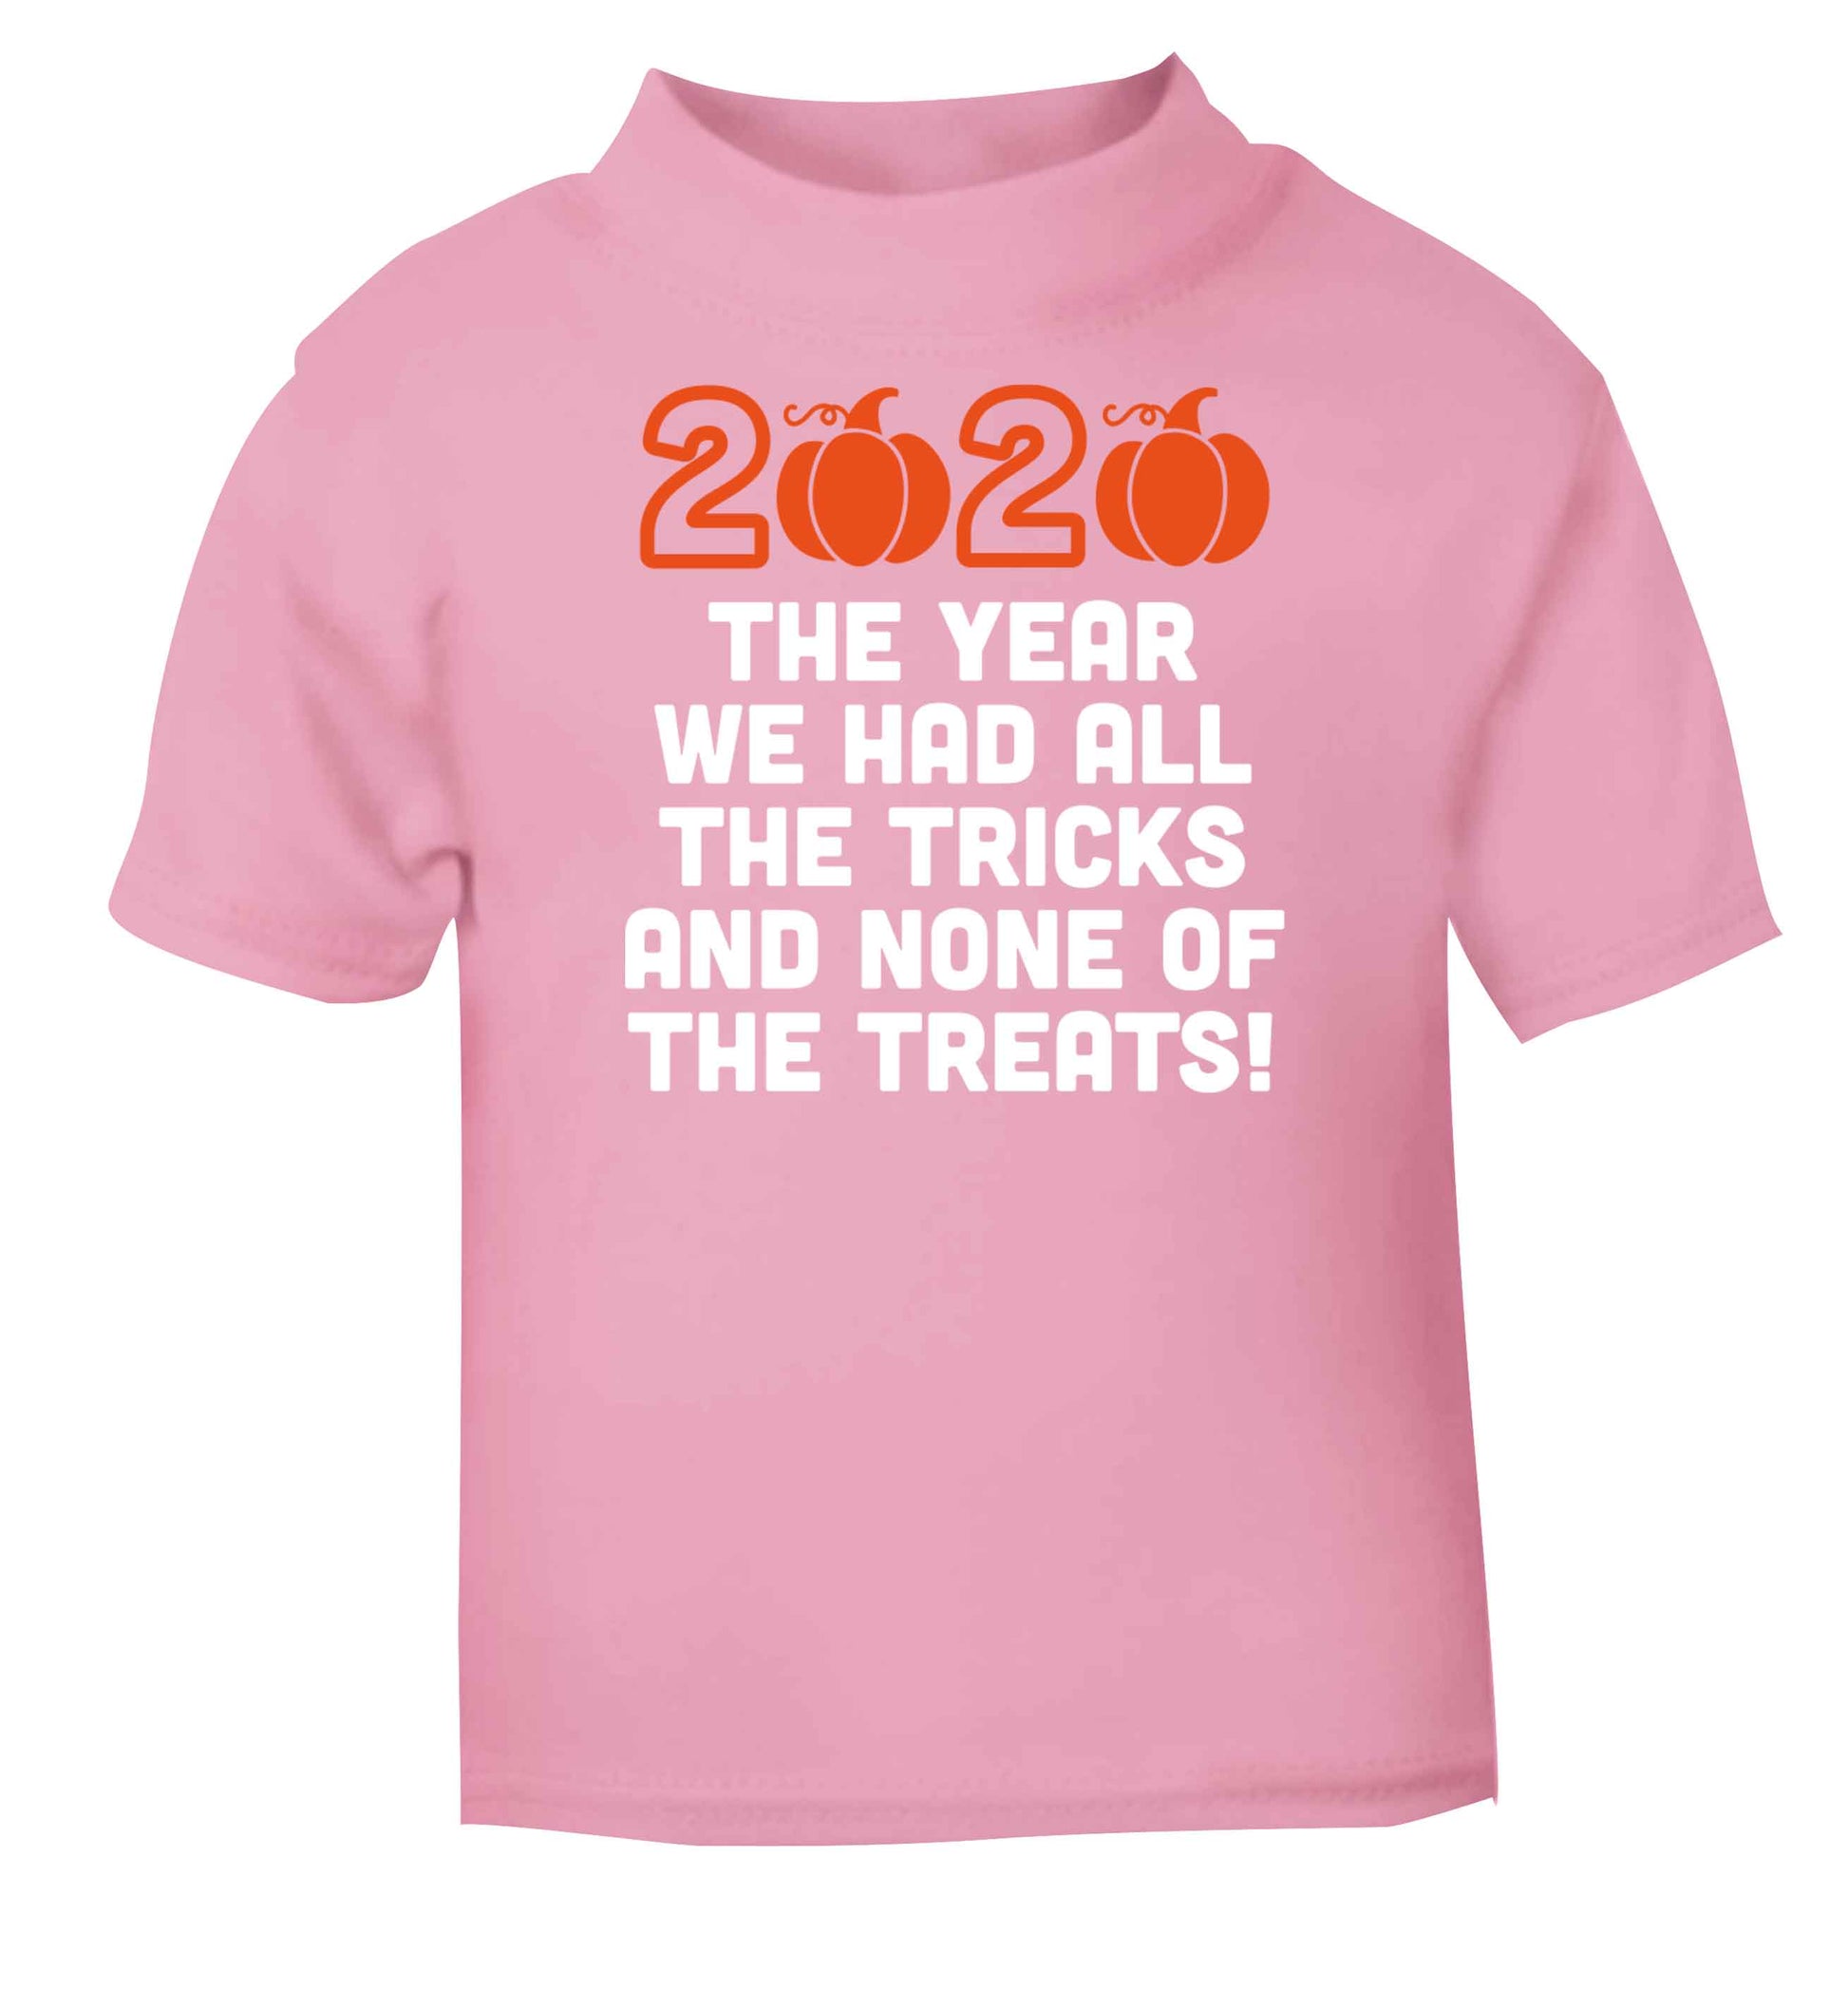 2020 The year we had all of the tricks and none of the treats light pink baby toddler Tshirt 2 Years